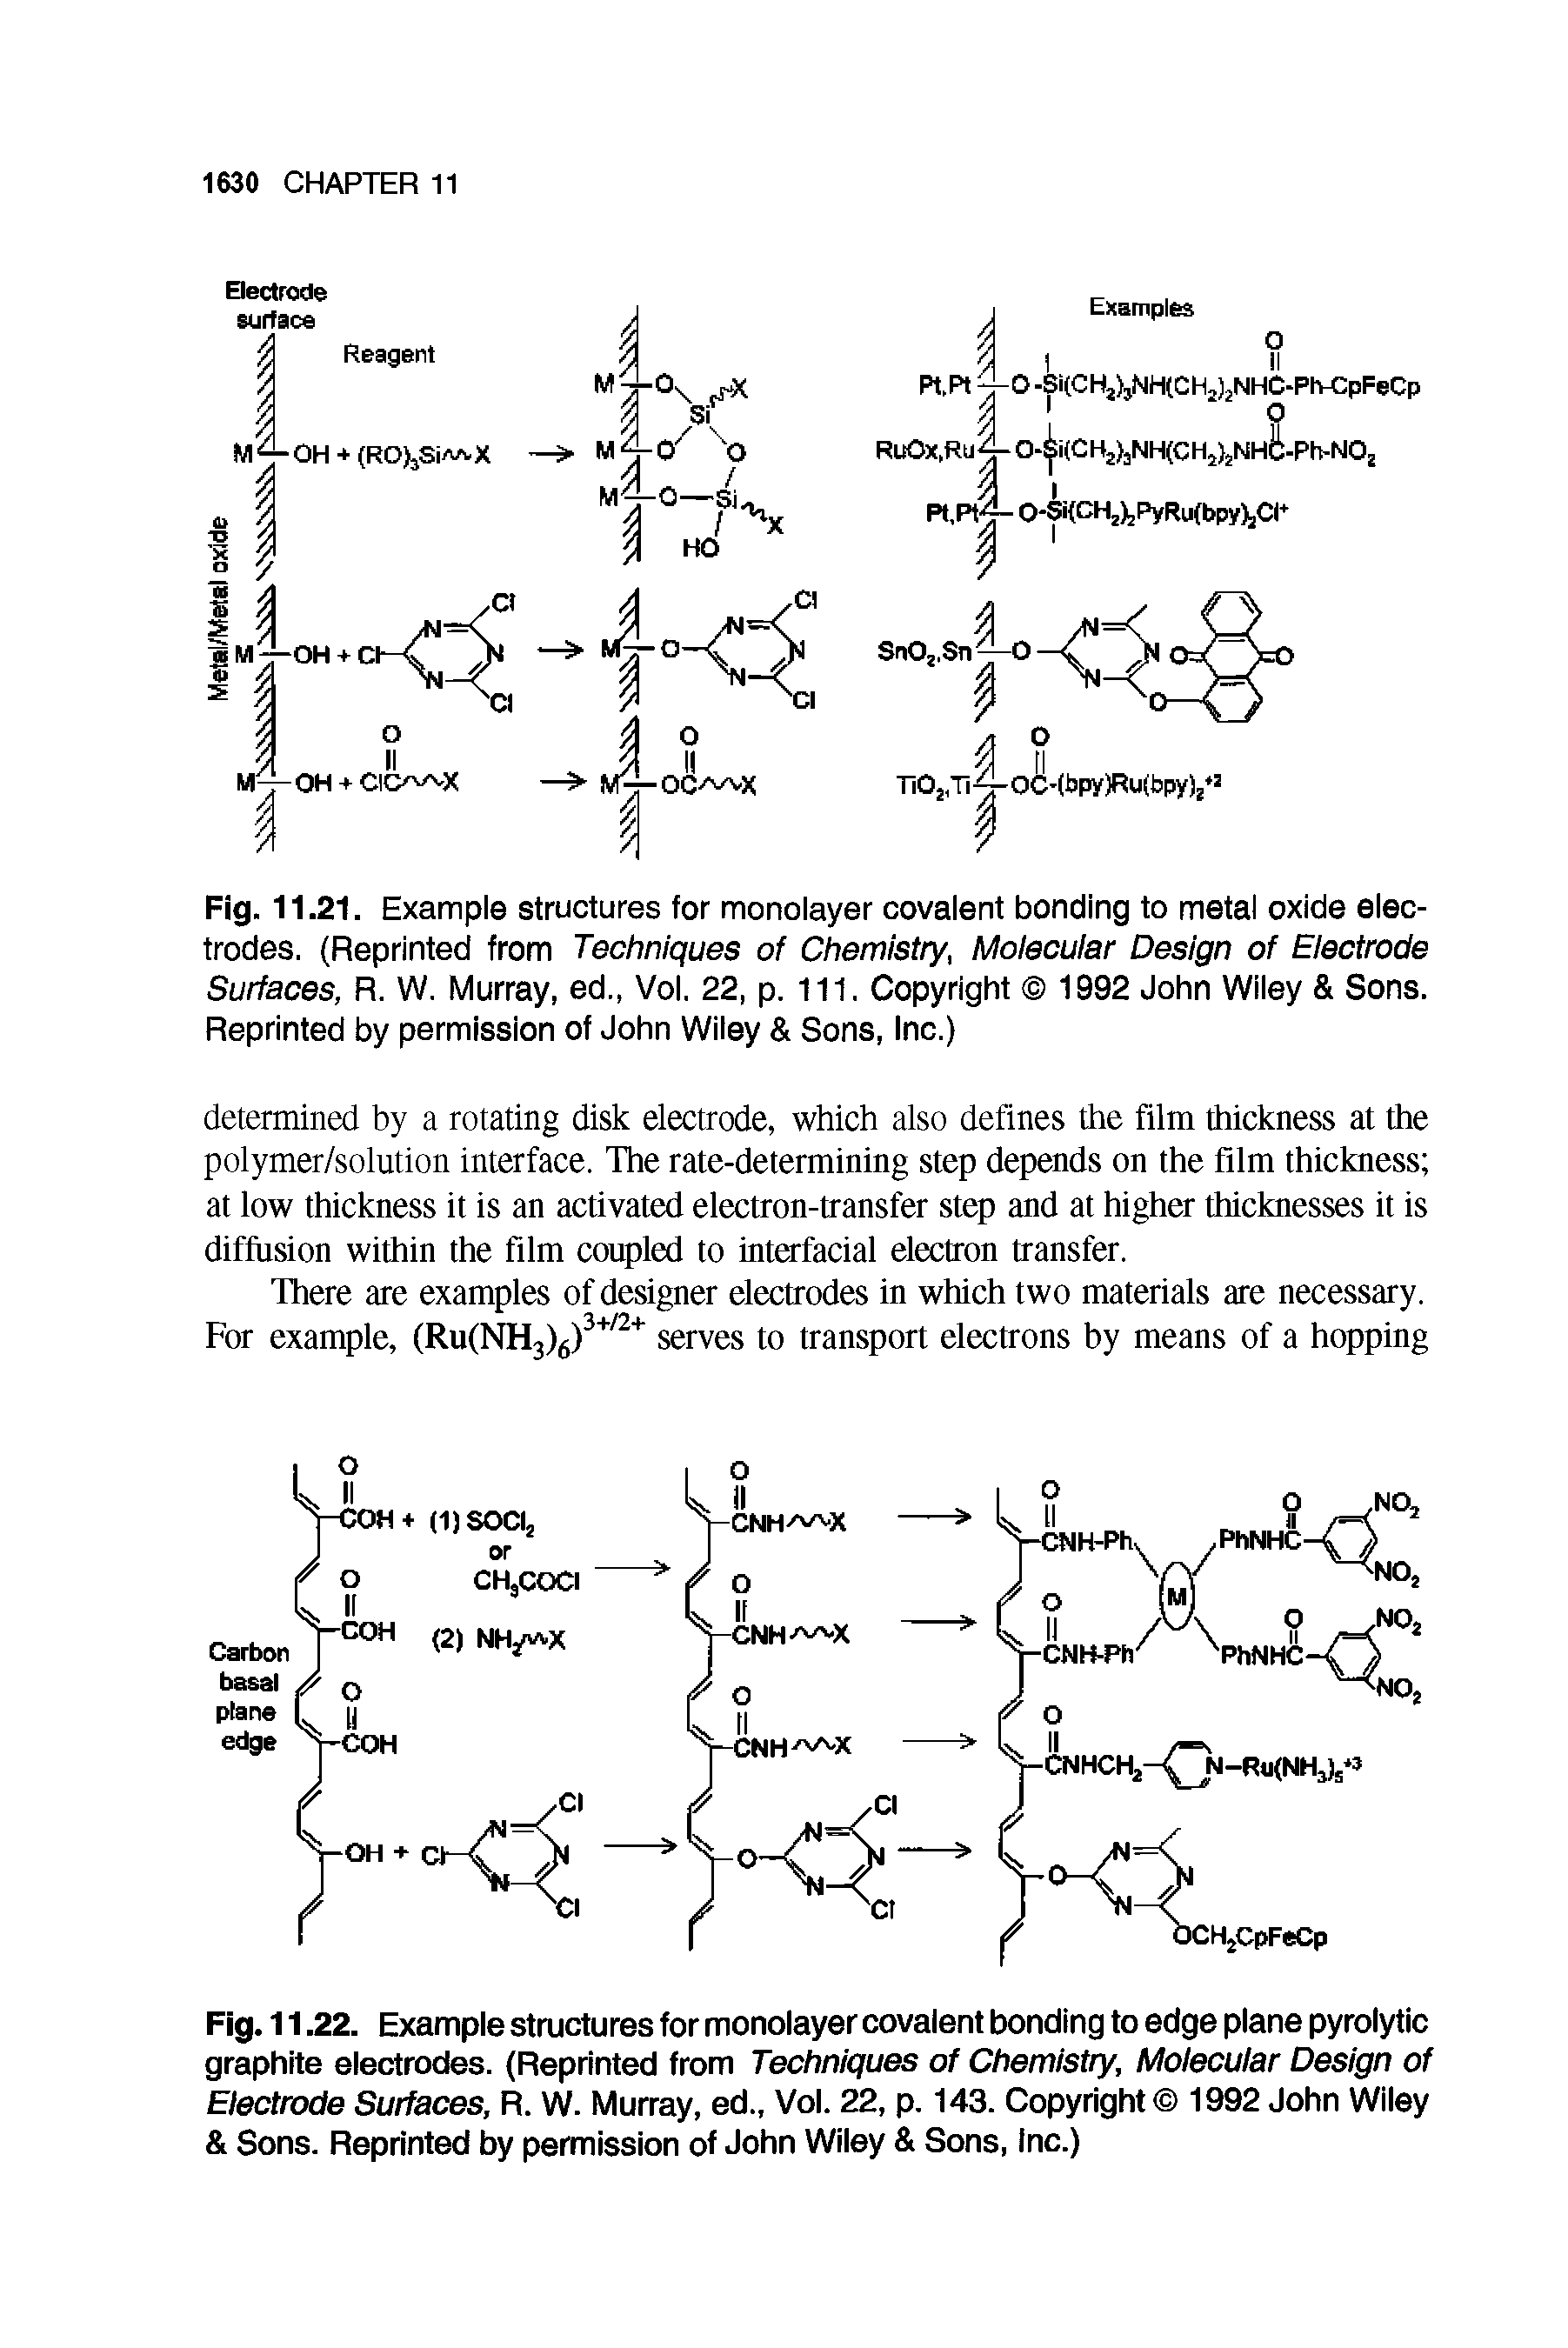 Fig. 11.22. Example structures for monolayer covalent bonding to edge plane pyrolytic graphite electrodes. (Reprinted from Techniques of Chemistry, Molecular Design of Electrode Surfaces, R. W. Murray, ed., Vol. 22, p. 143. Copyright 1992 John Wiley Sons. Reprinted by permission of John Wiley Sons, Inc.)...